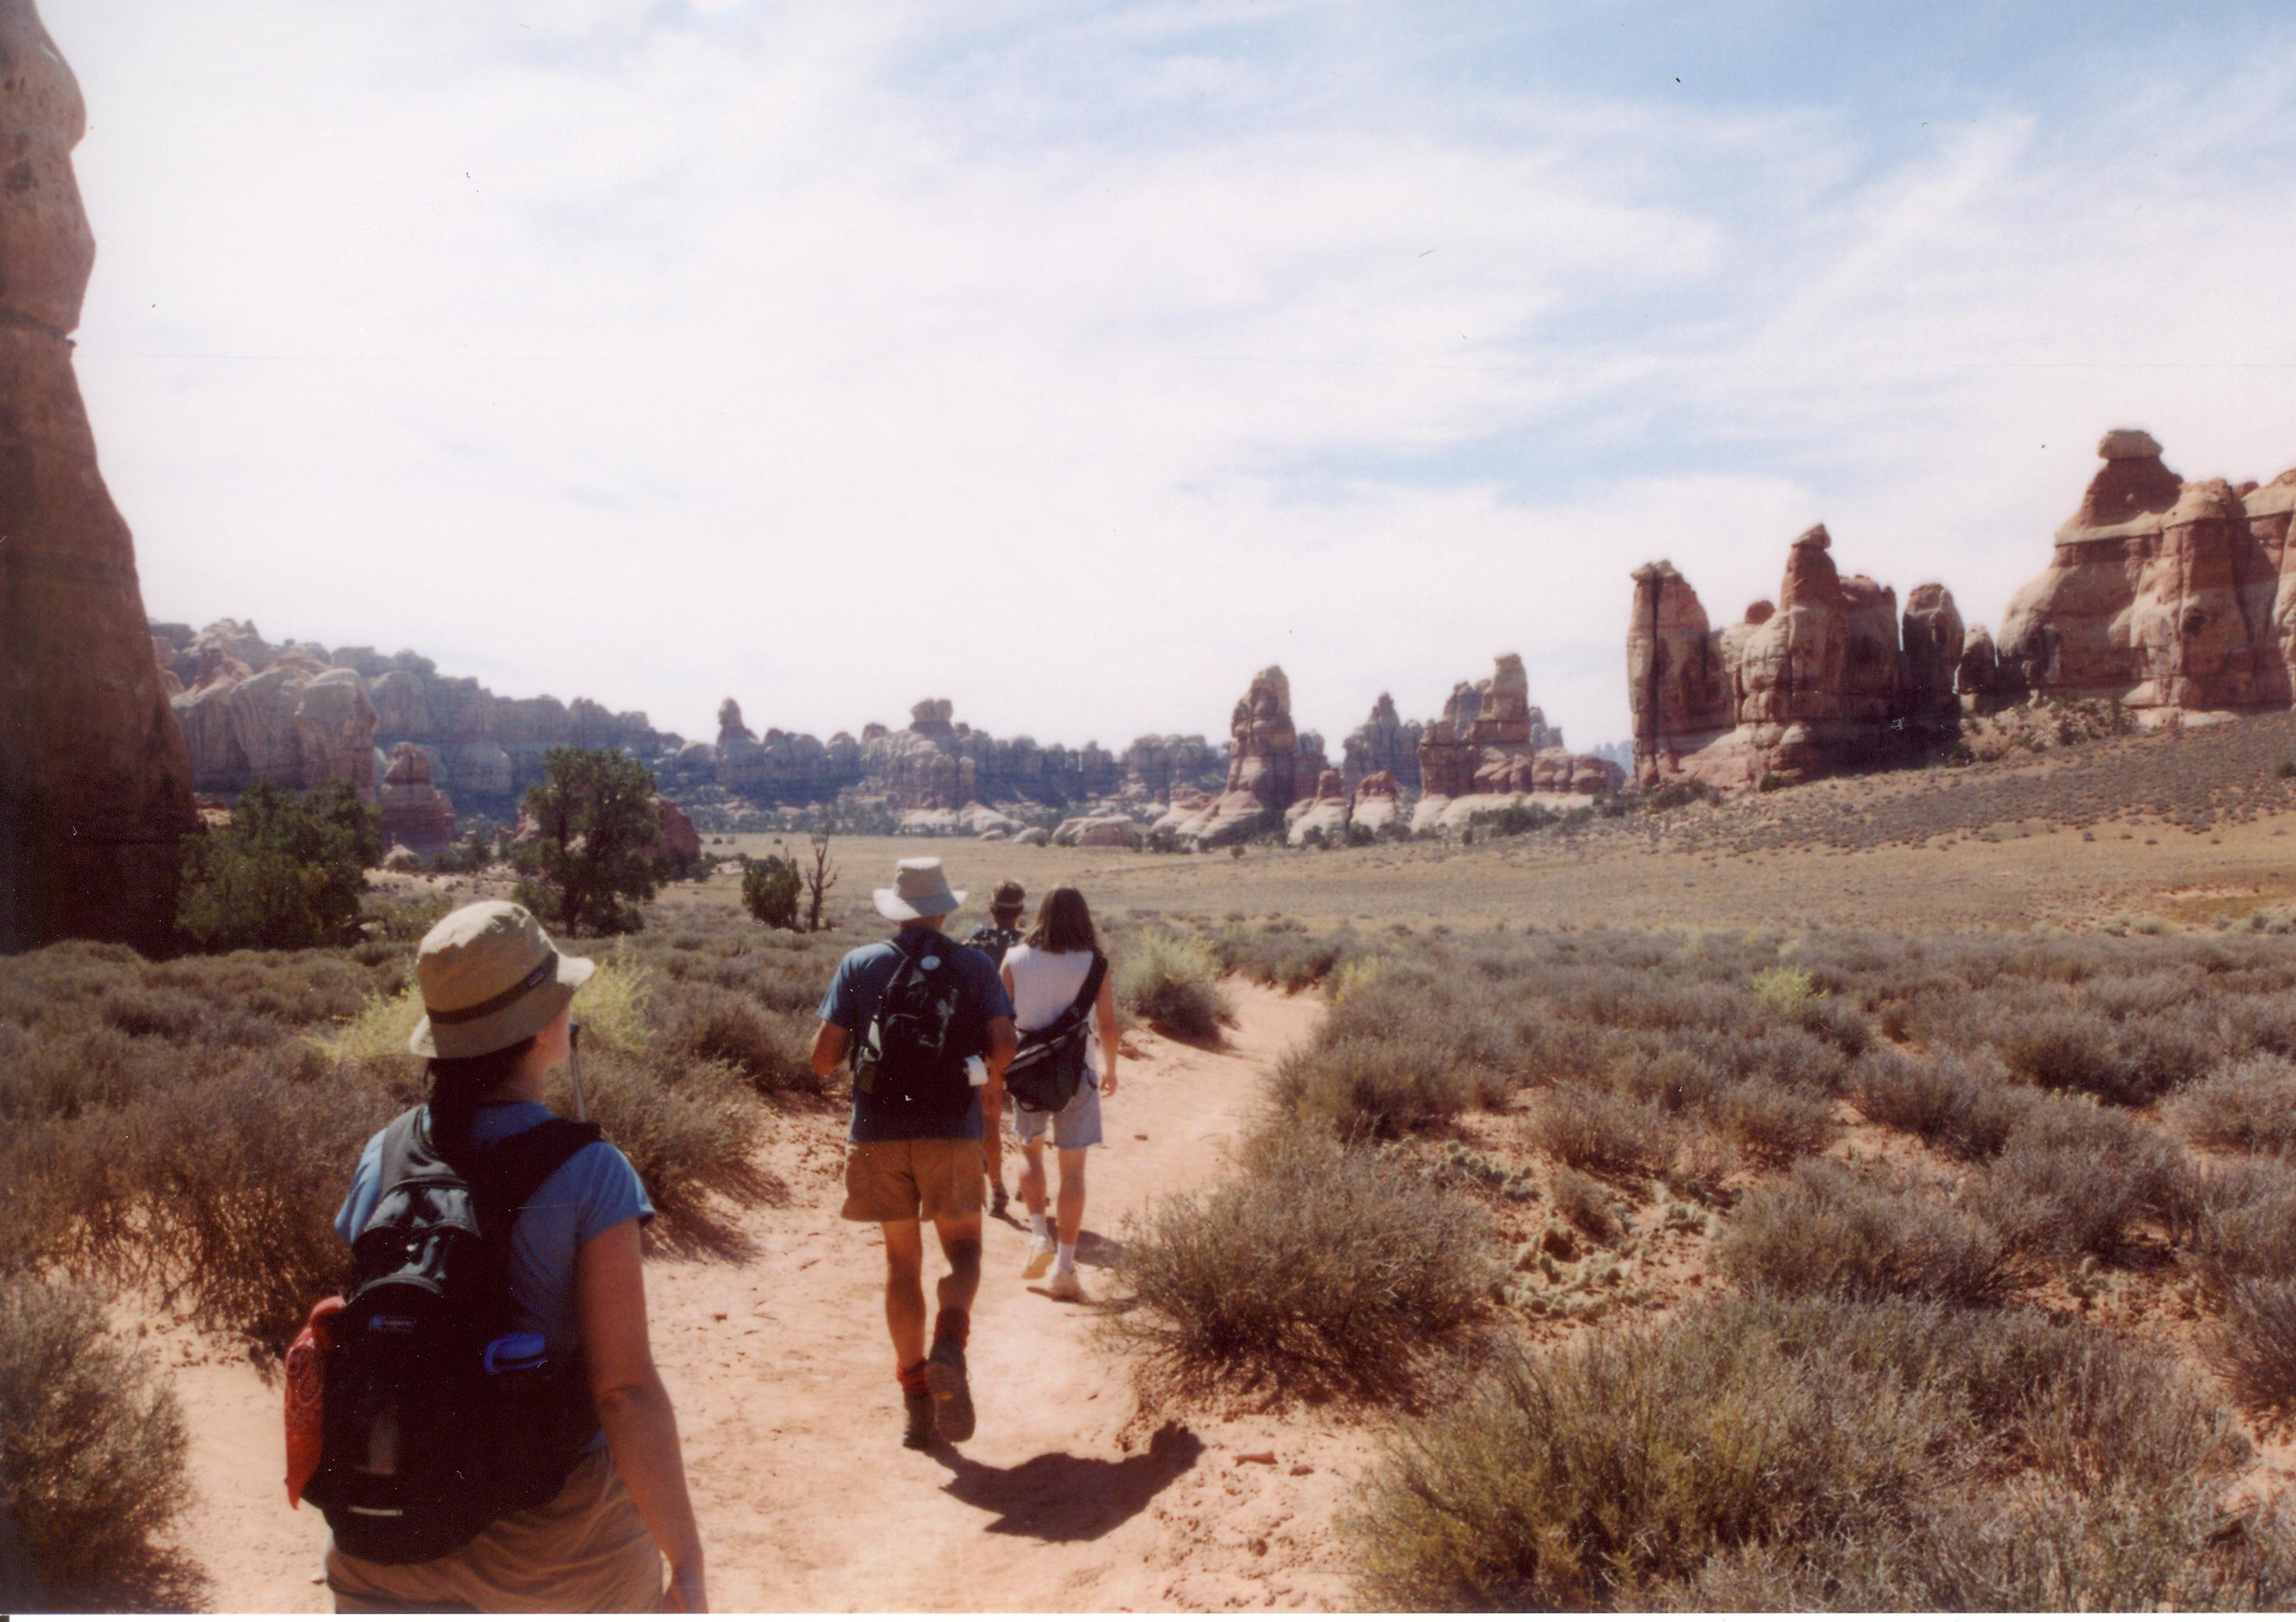 http://davepics.com/Album/2003/09-21.Canyonlands_Arches_Needles/44%20How%20much%20farther.jpg